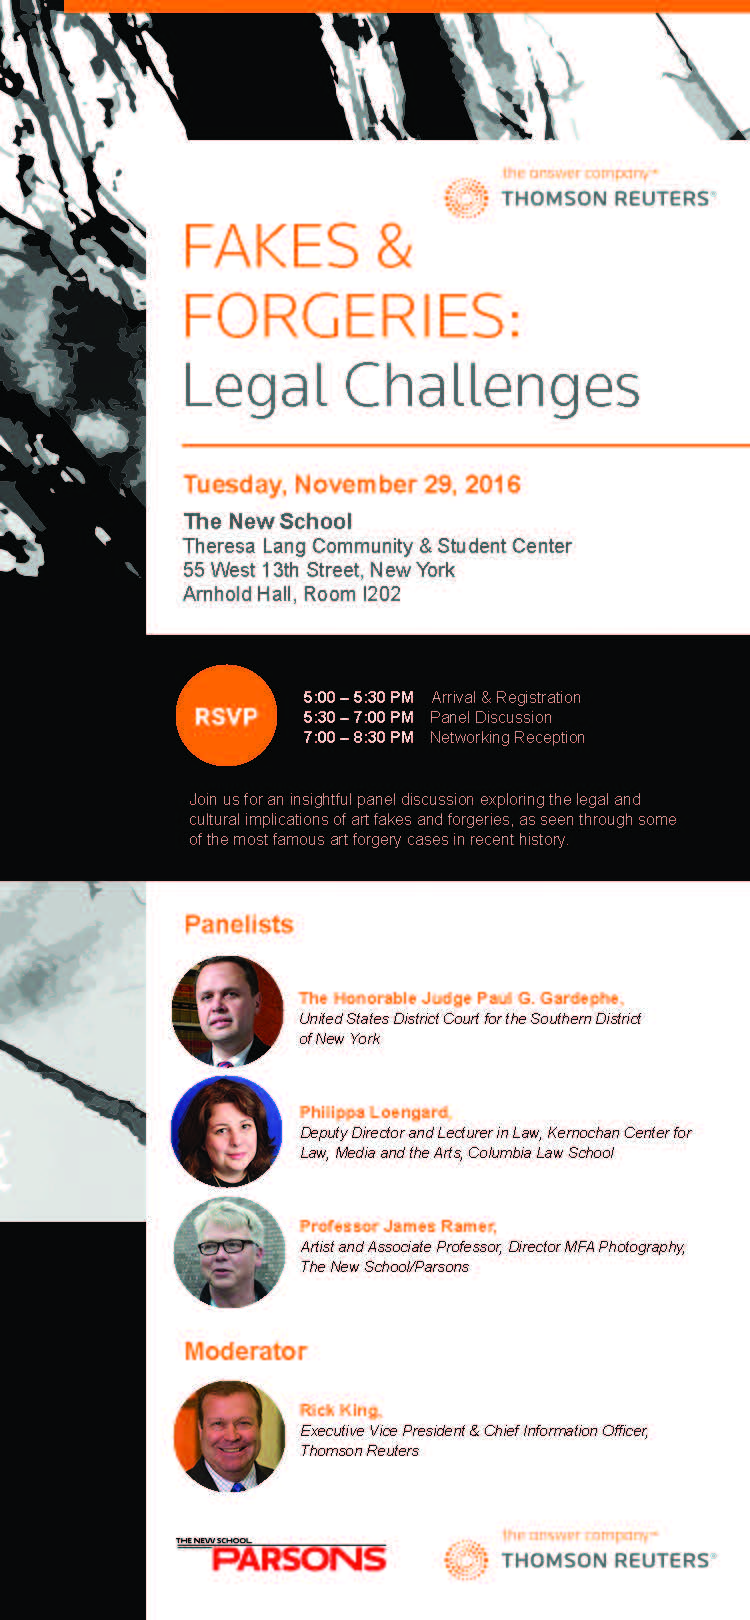 Fakes & Forgeries: Legal Challenges Panel Discussion, 11/29